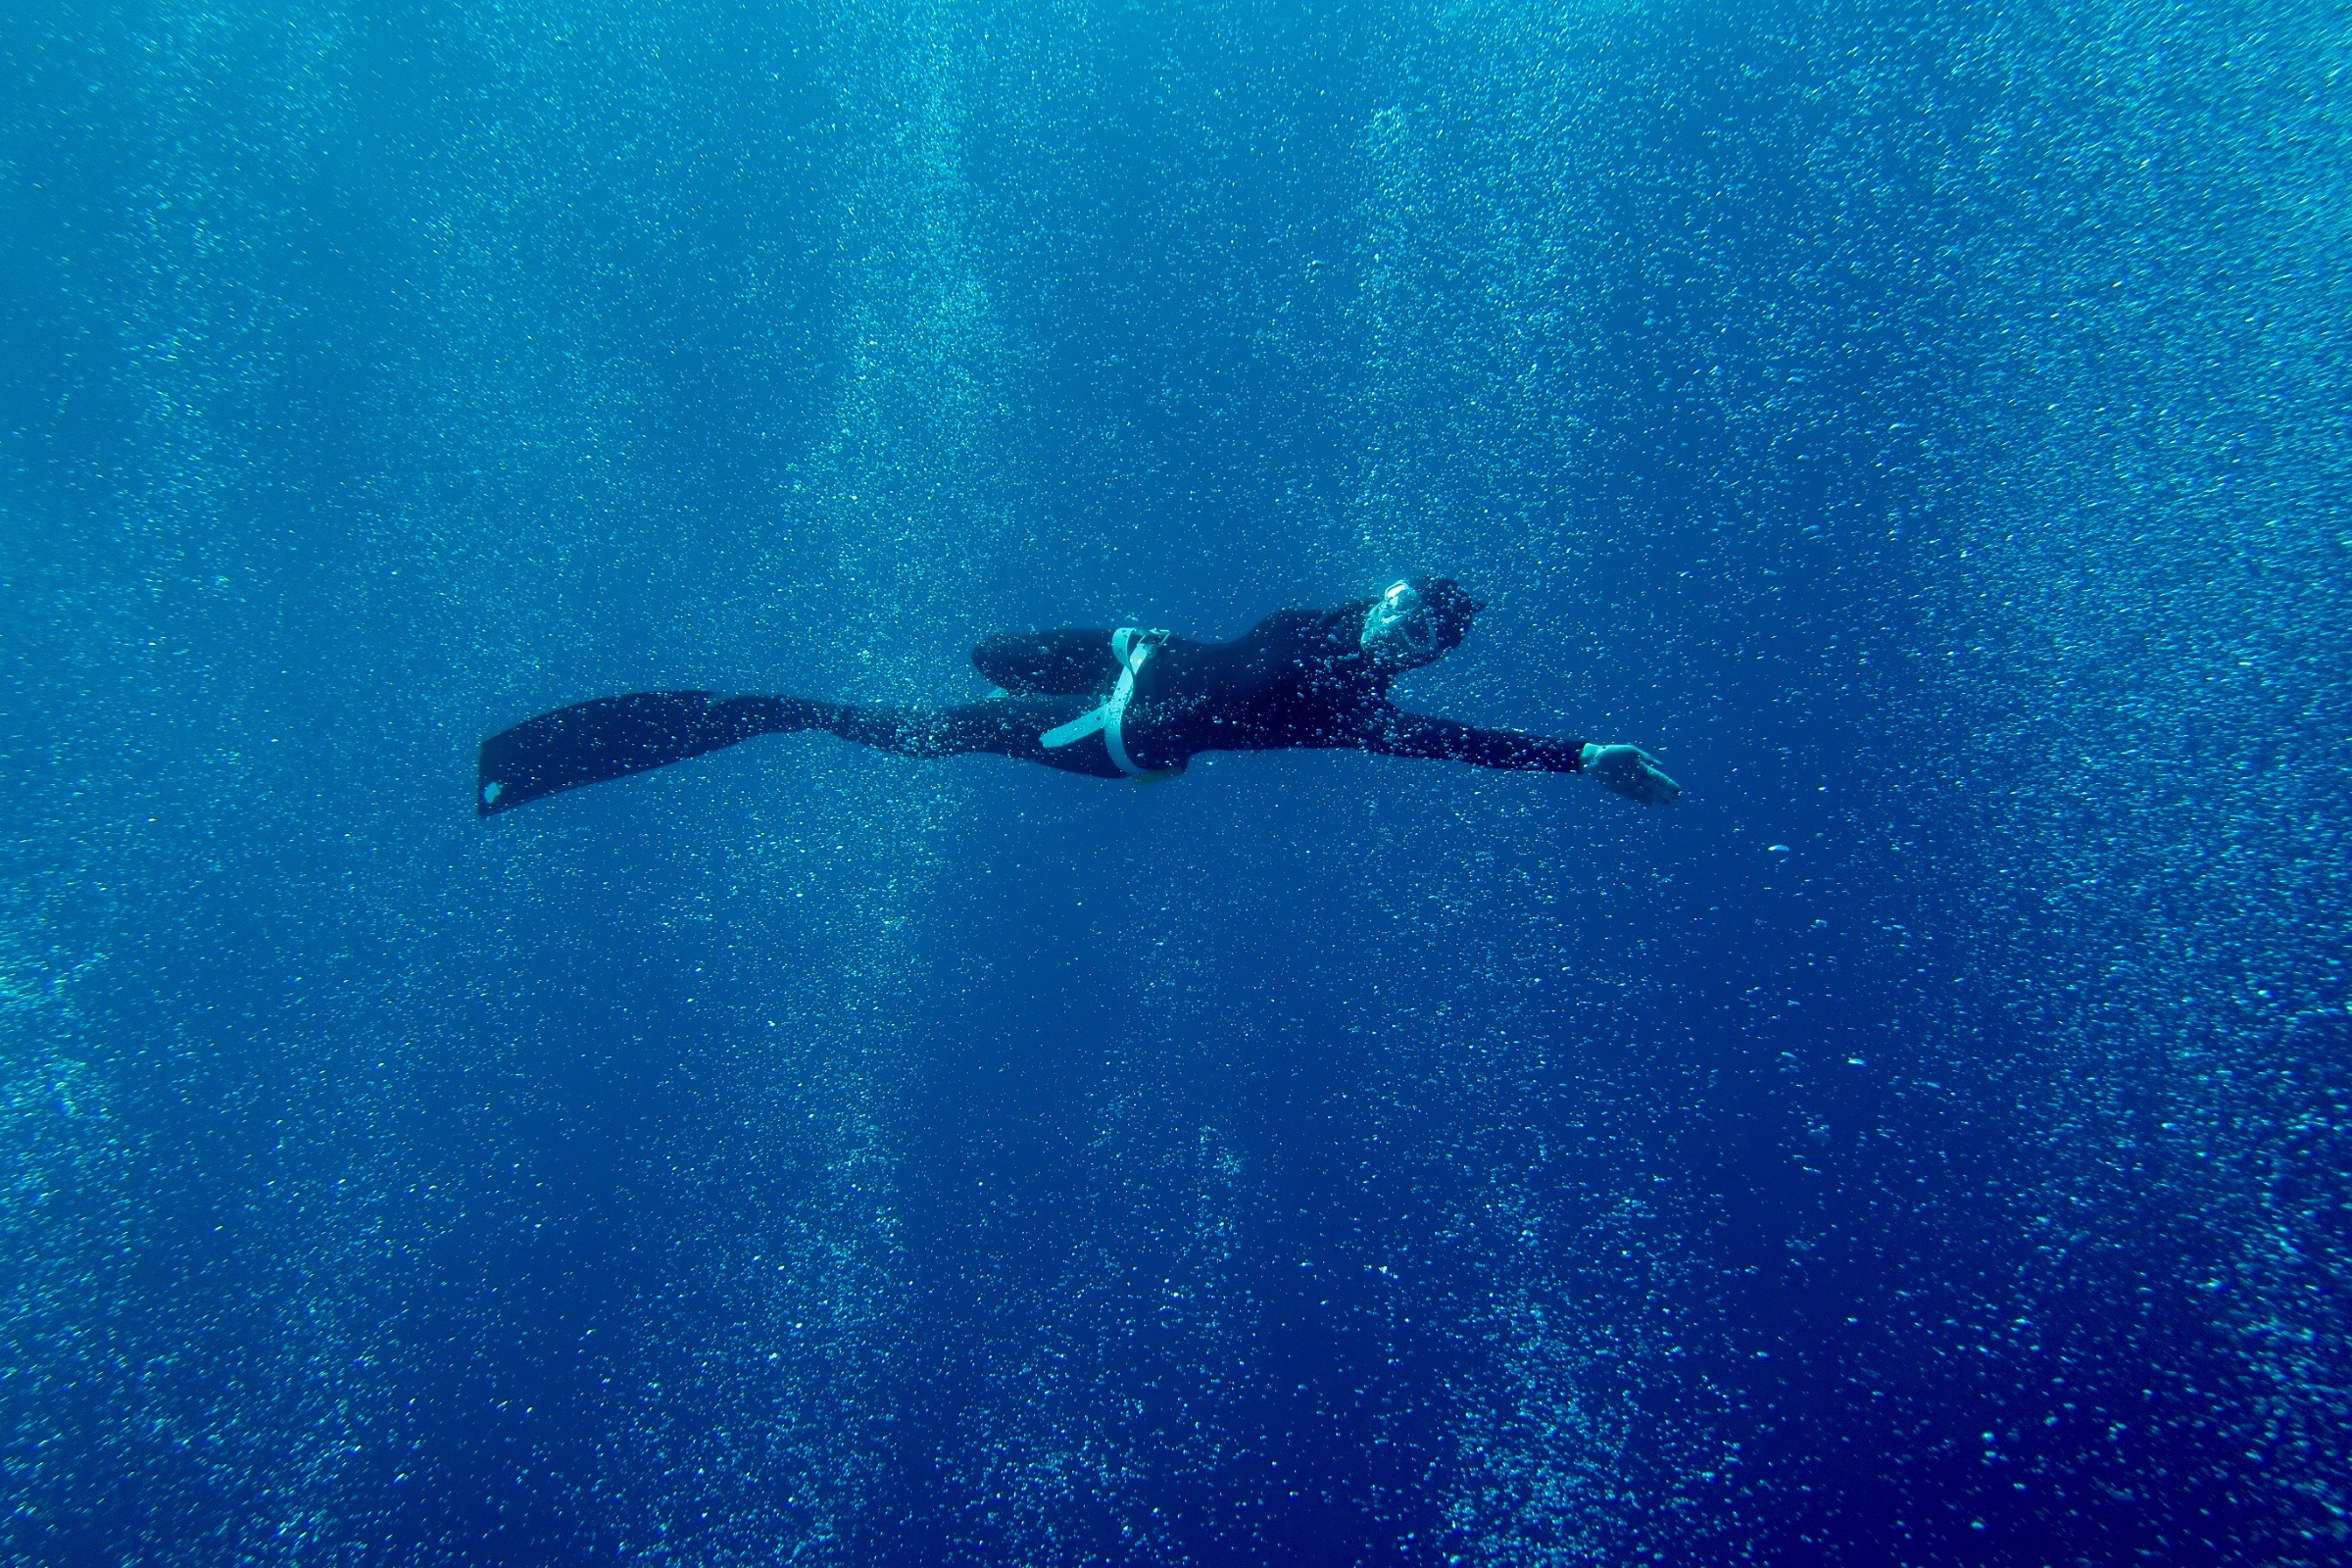 Freediving using mindful techniques